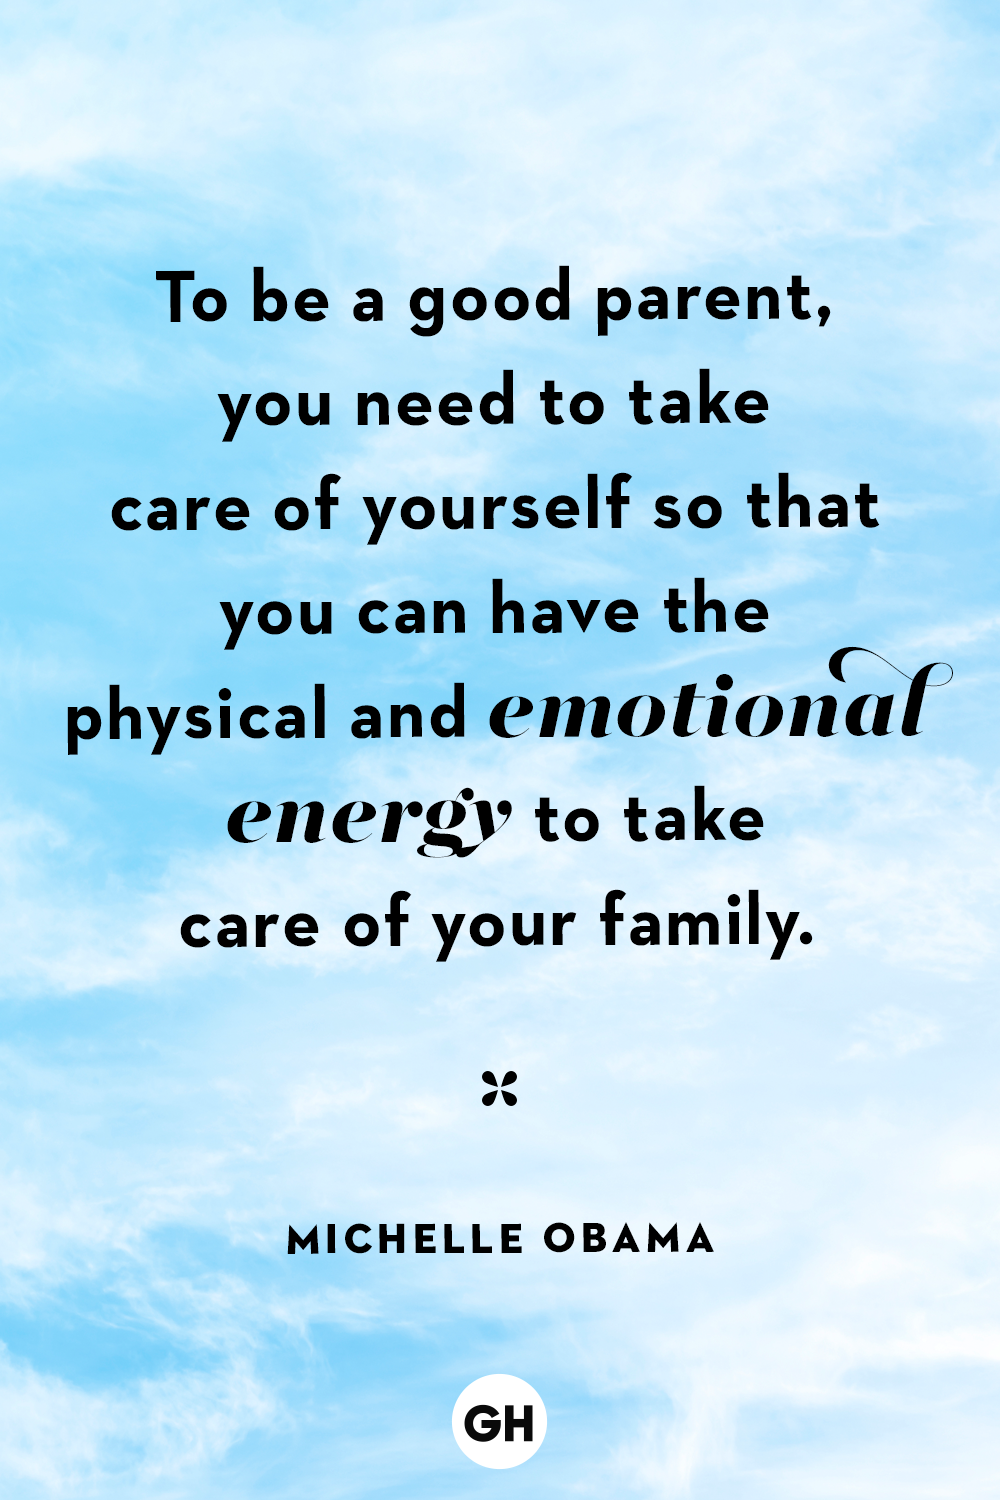 to be a good parent, you need to take care of yourself so that you can have the physical and emotional energy to take care of your family. michelle obama